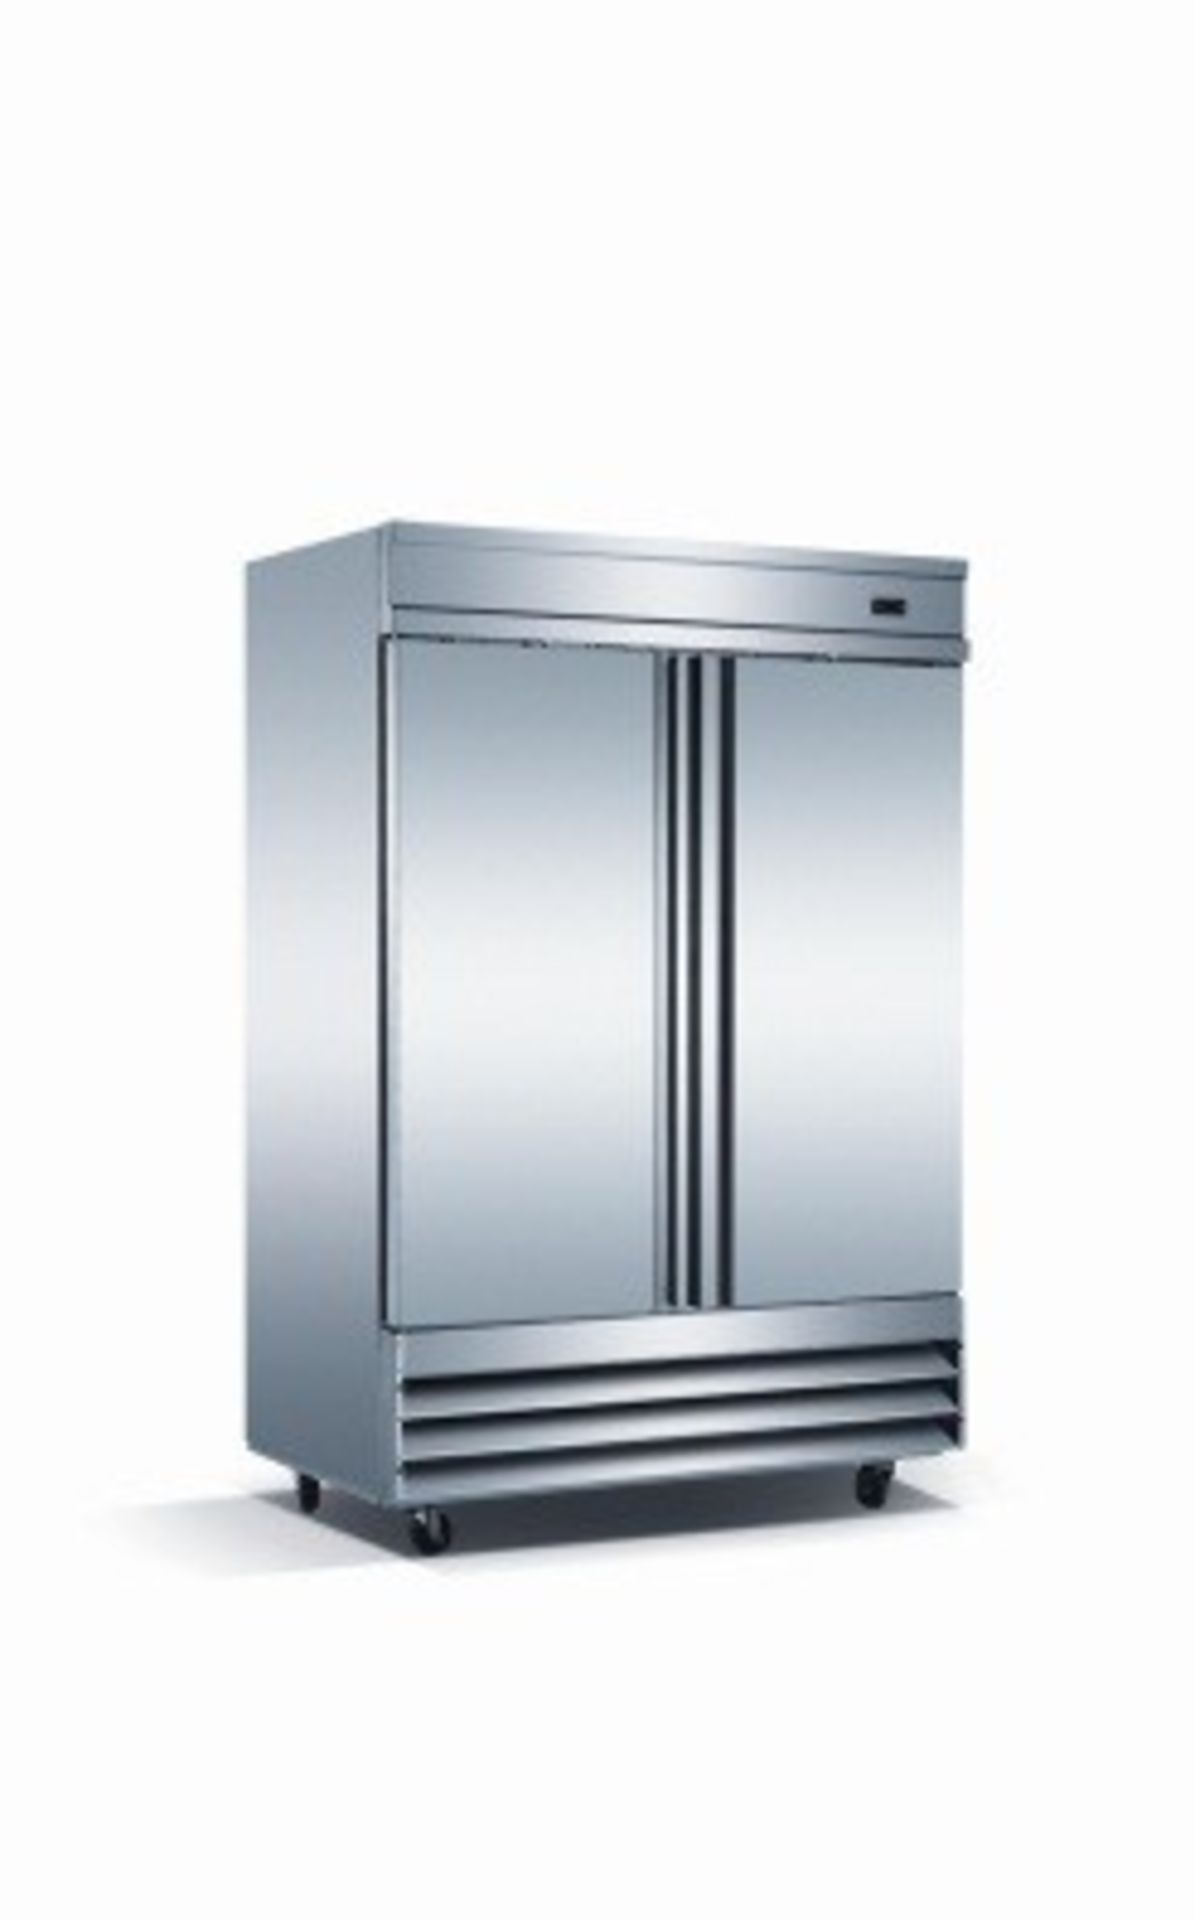 EQ Stainless Steel Reach-In Refrigerator 349 Gal, Silver Model #:CFD-2RR L*W*H (inch):54*32.25*82.